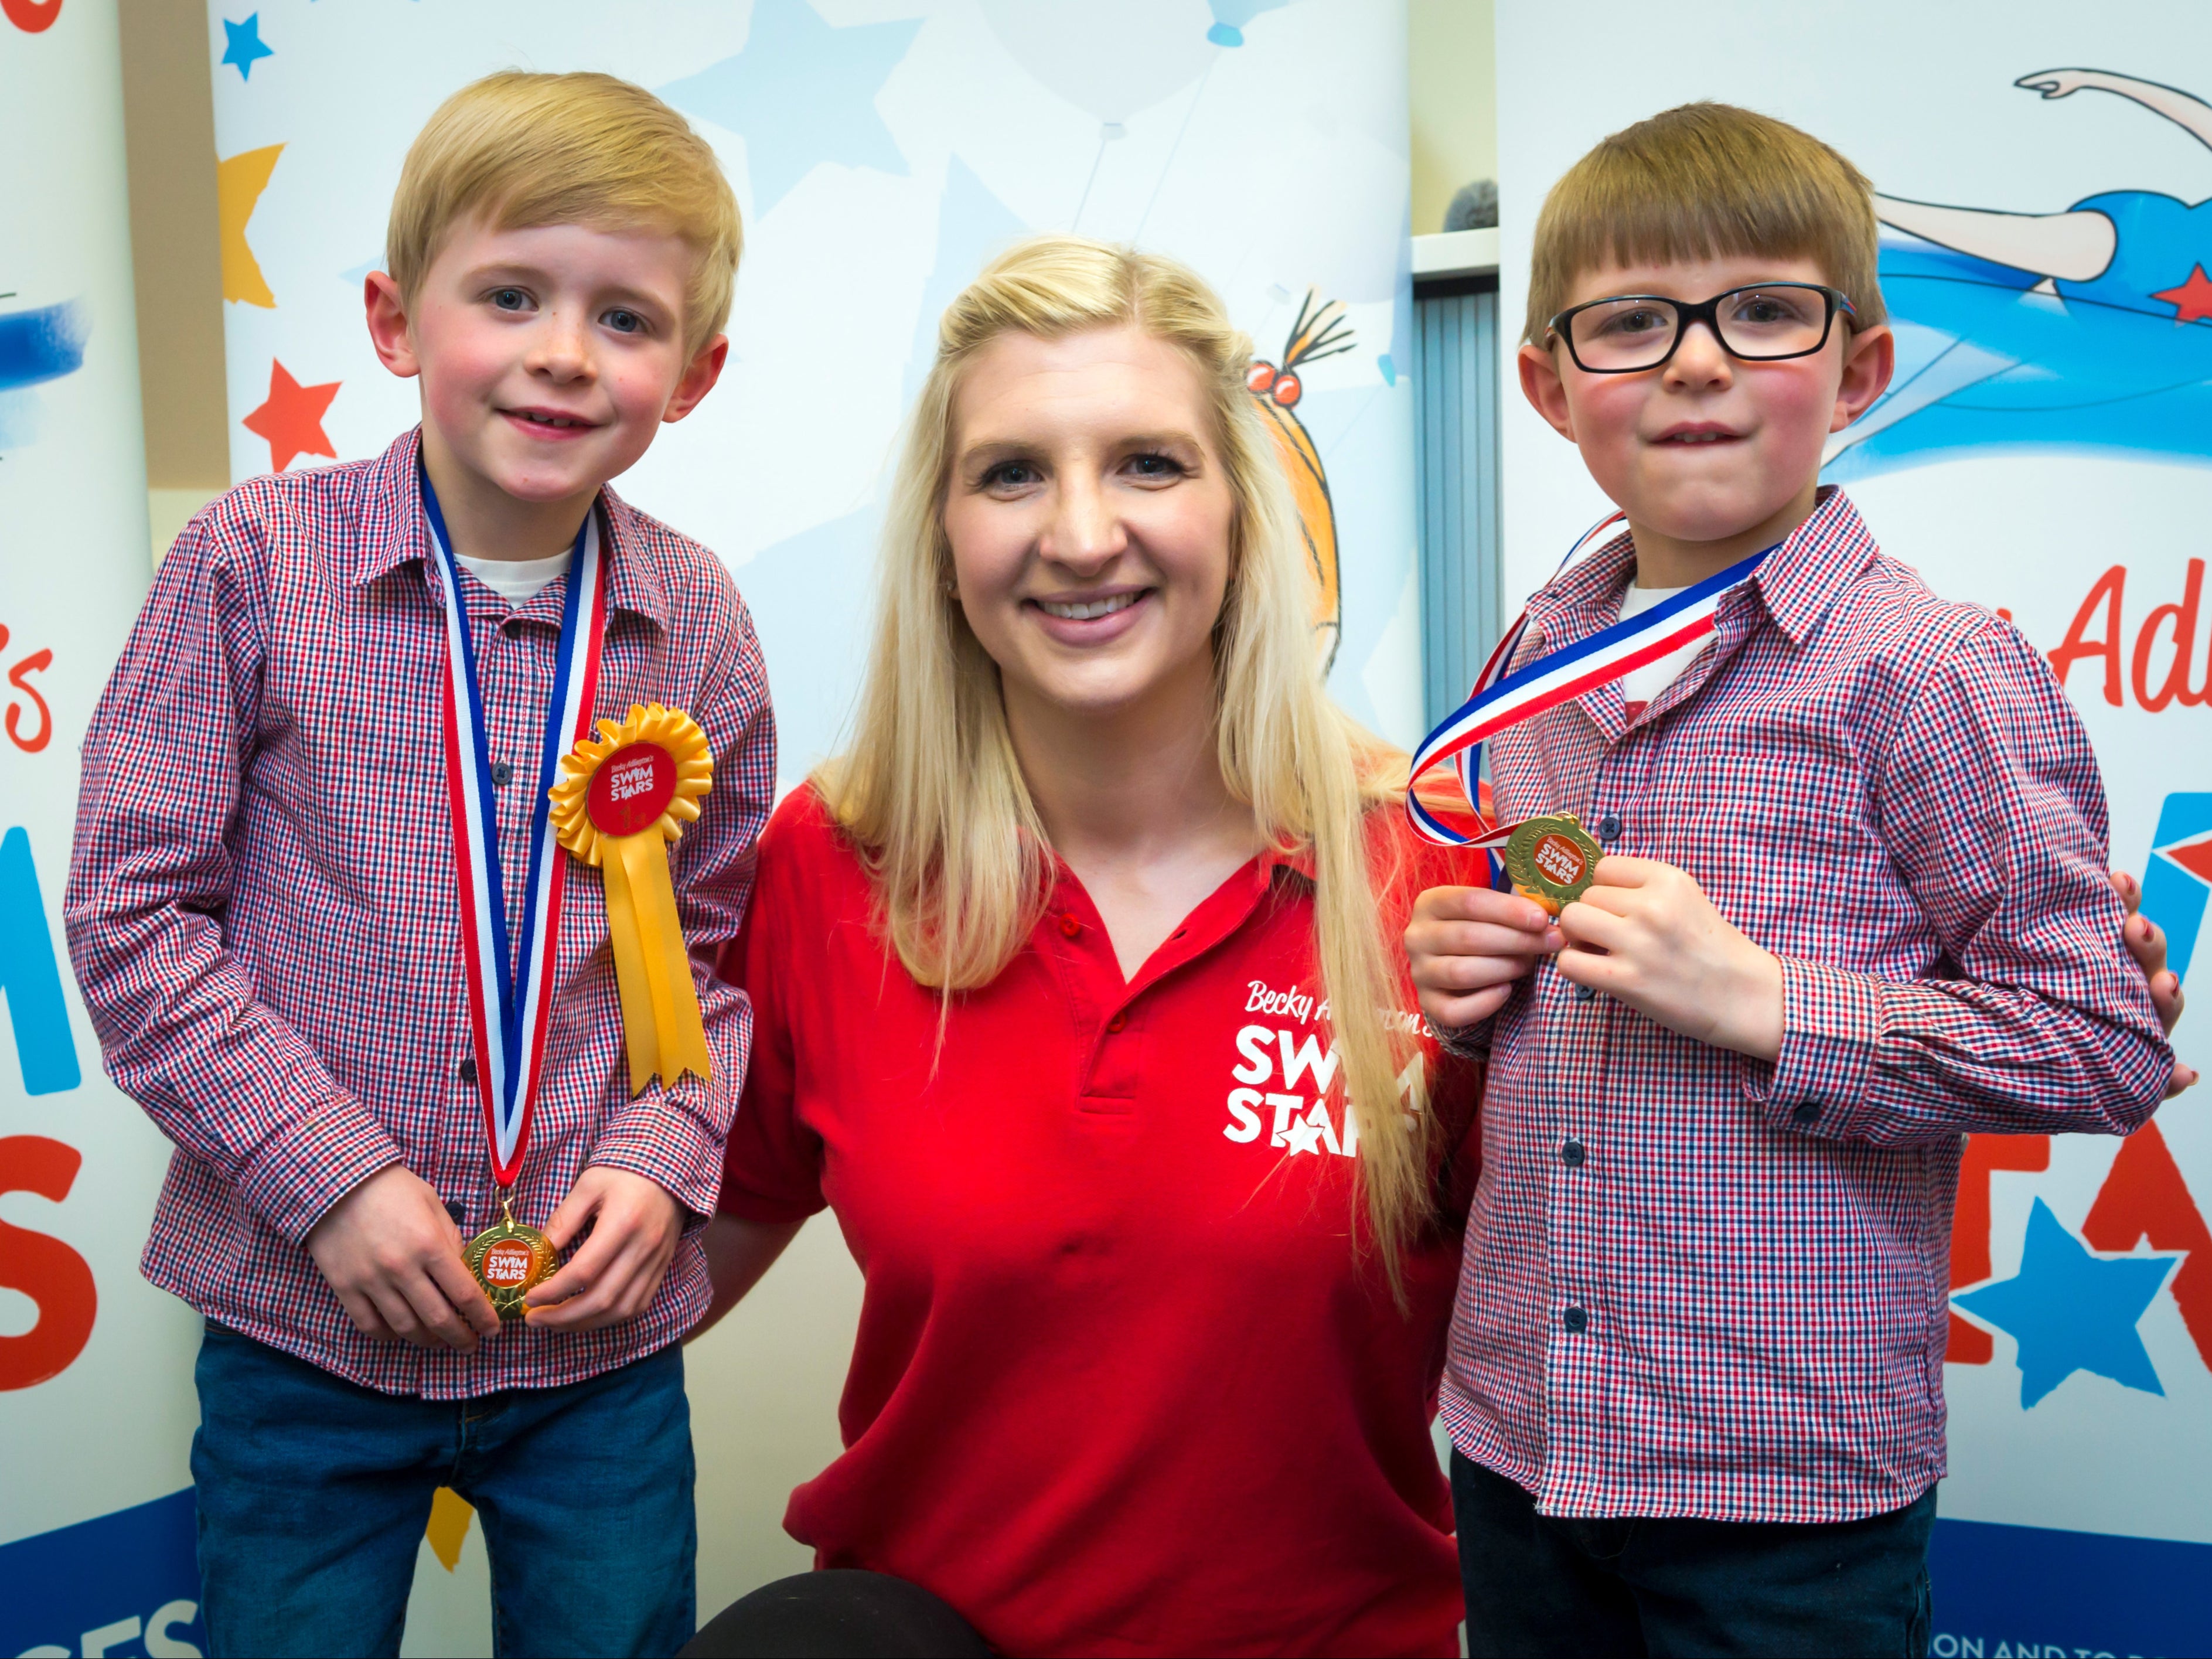 Olympic swimmer Becky Adlington wants to help improve grassroots sport